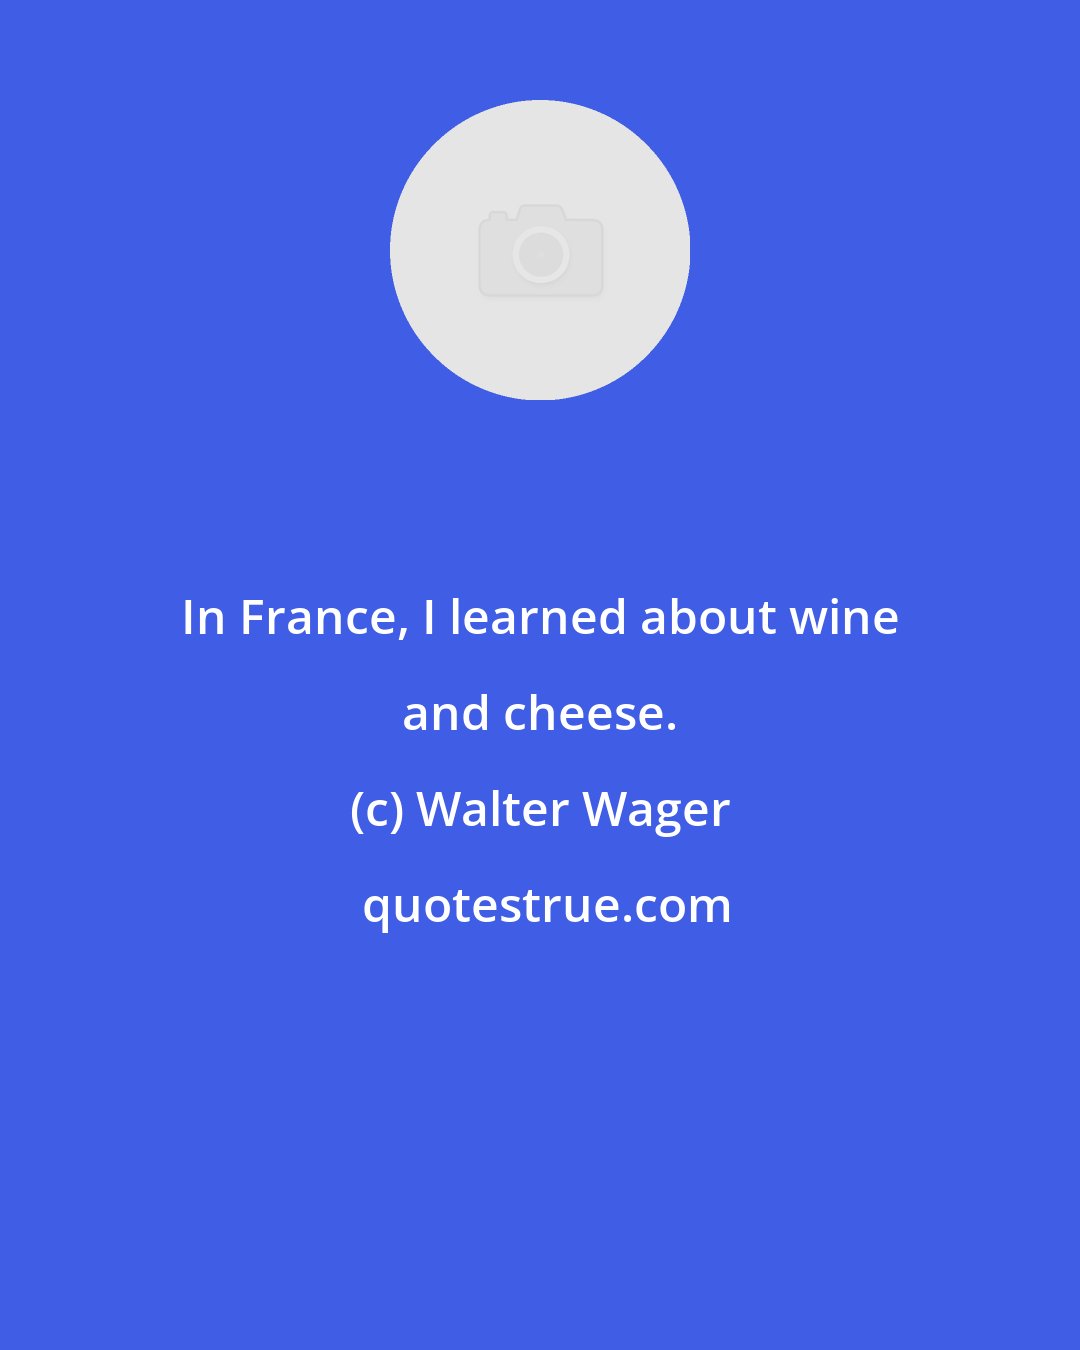 Walter Wager: In France, I learned about wine and cheese.